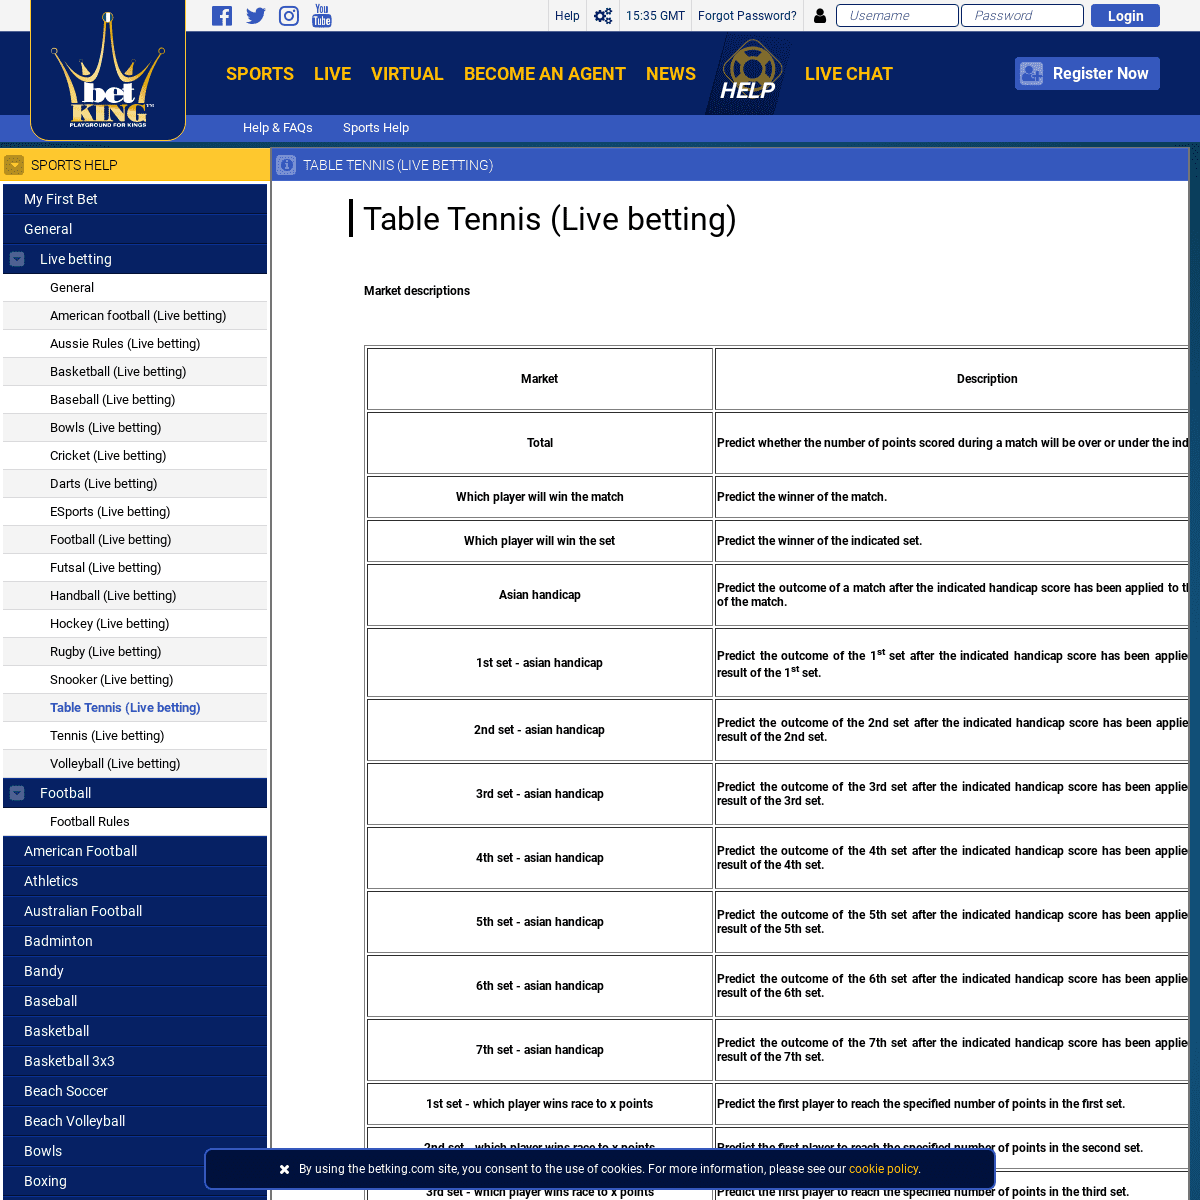 A complete backup of https://www.betking.com/help/sports-help/live-betting/table-tennis/